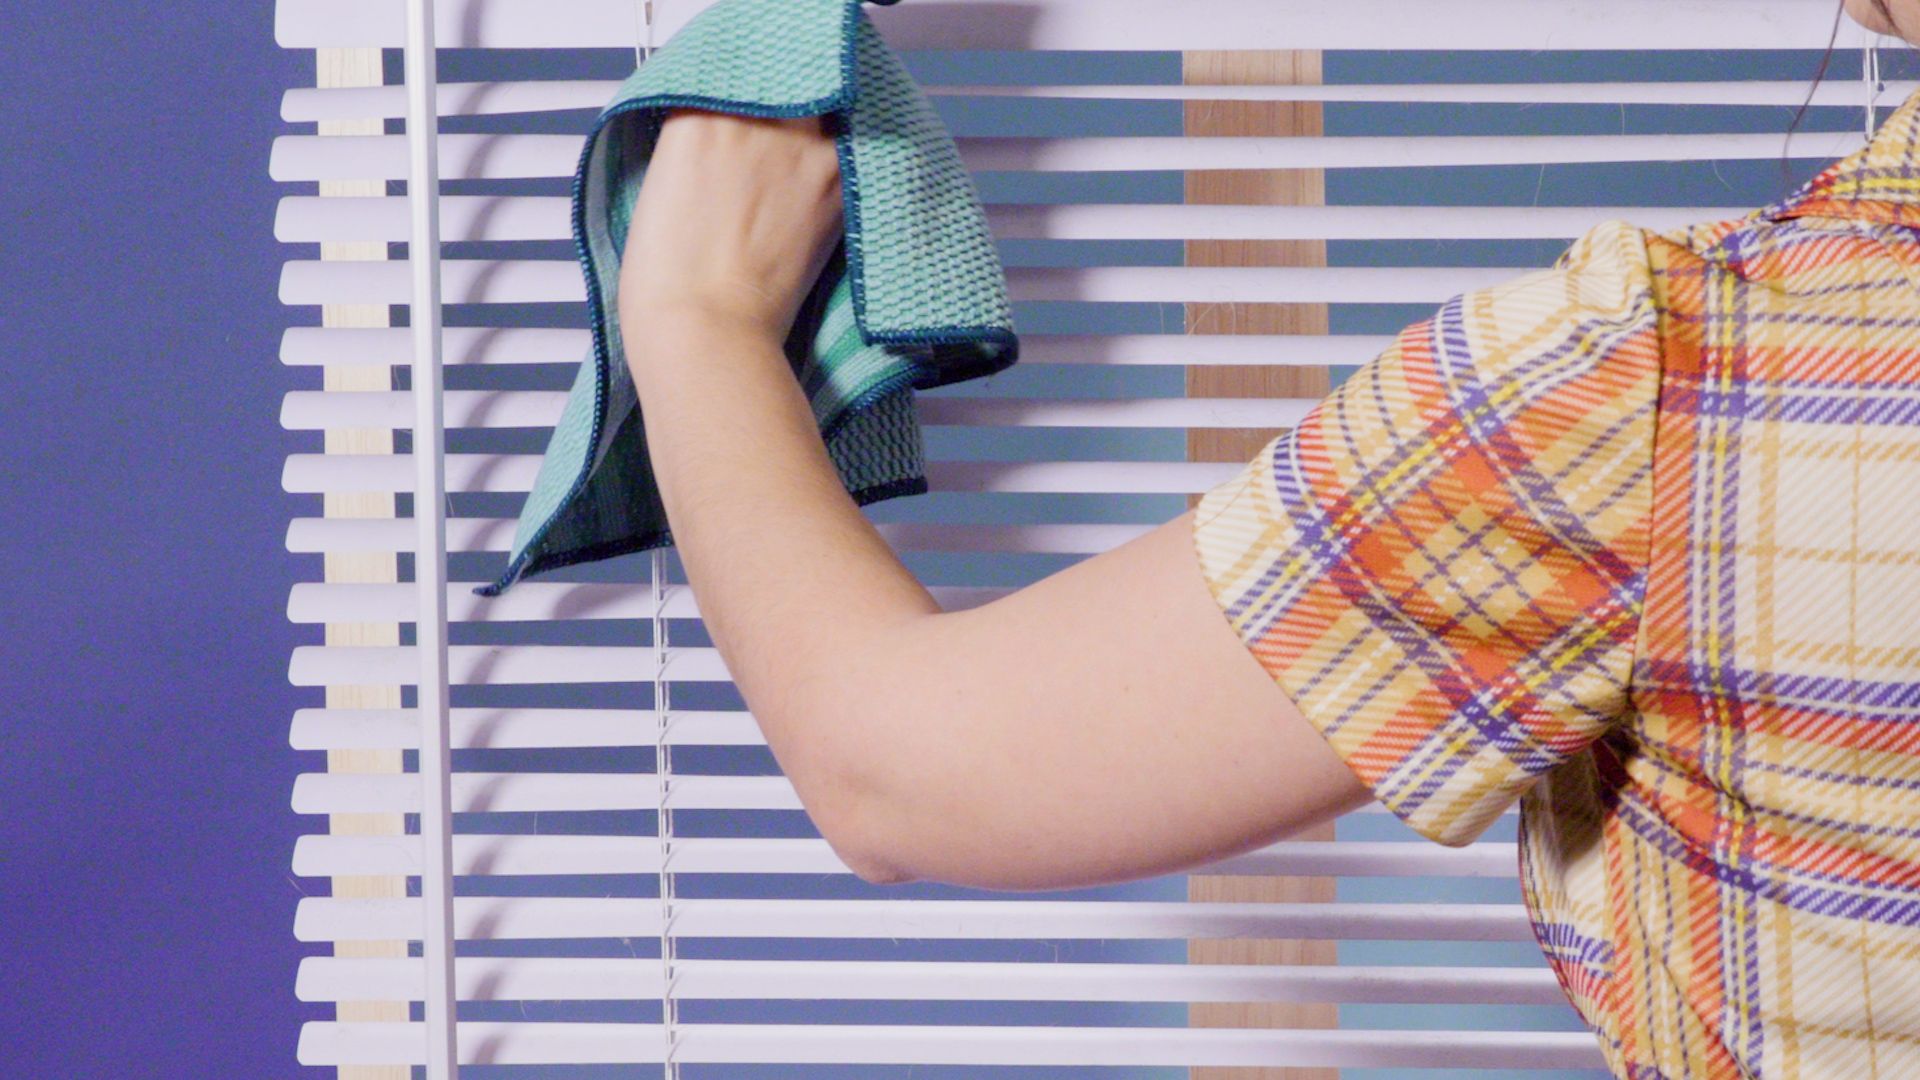 How To Clean Blinds, According To Professional Cleaners